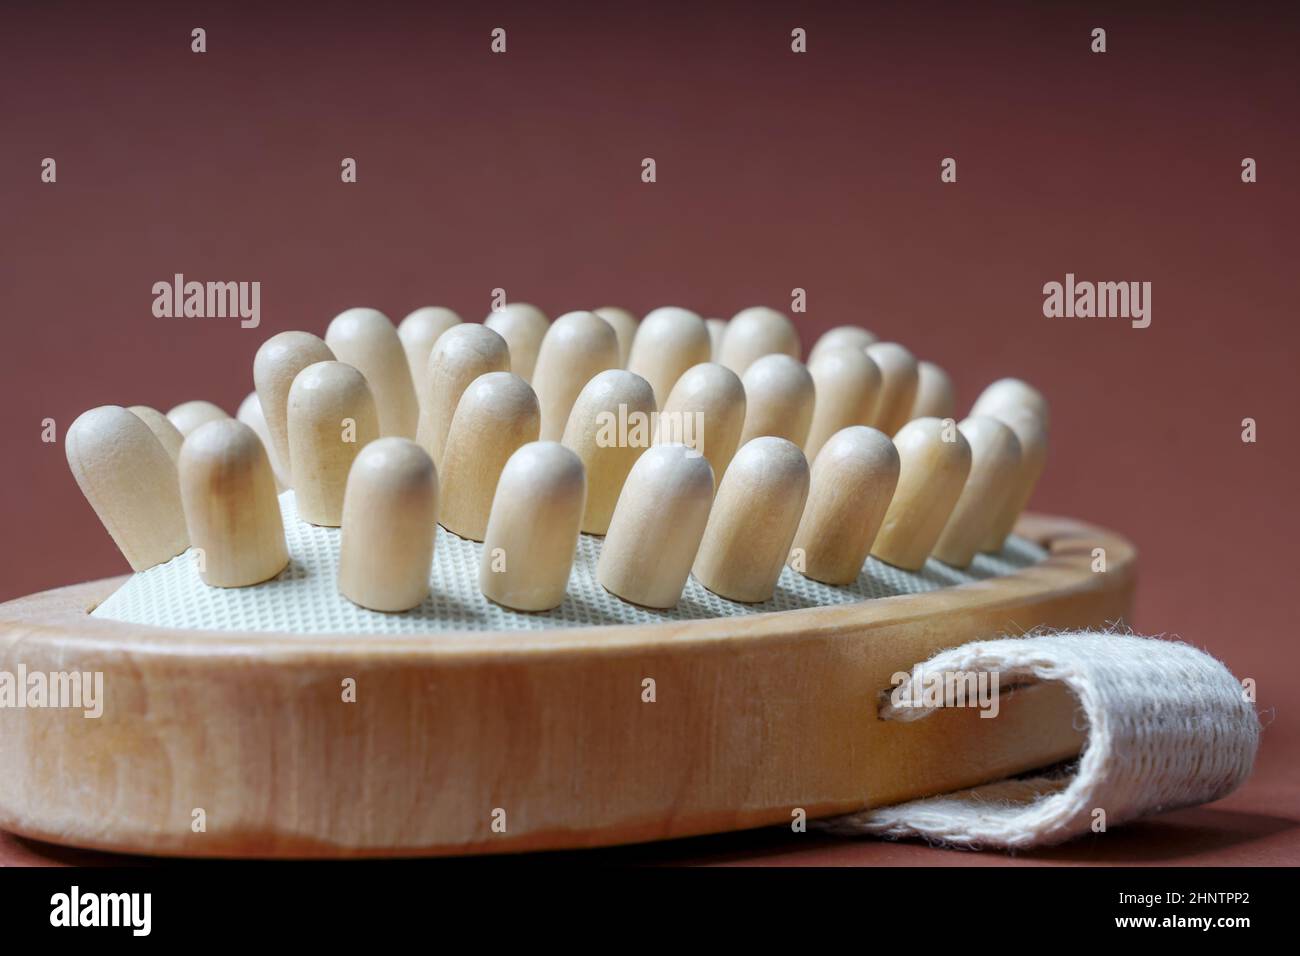 Still life and close-up of a wooden measuring brush Stock Photo